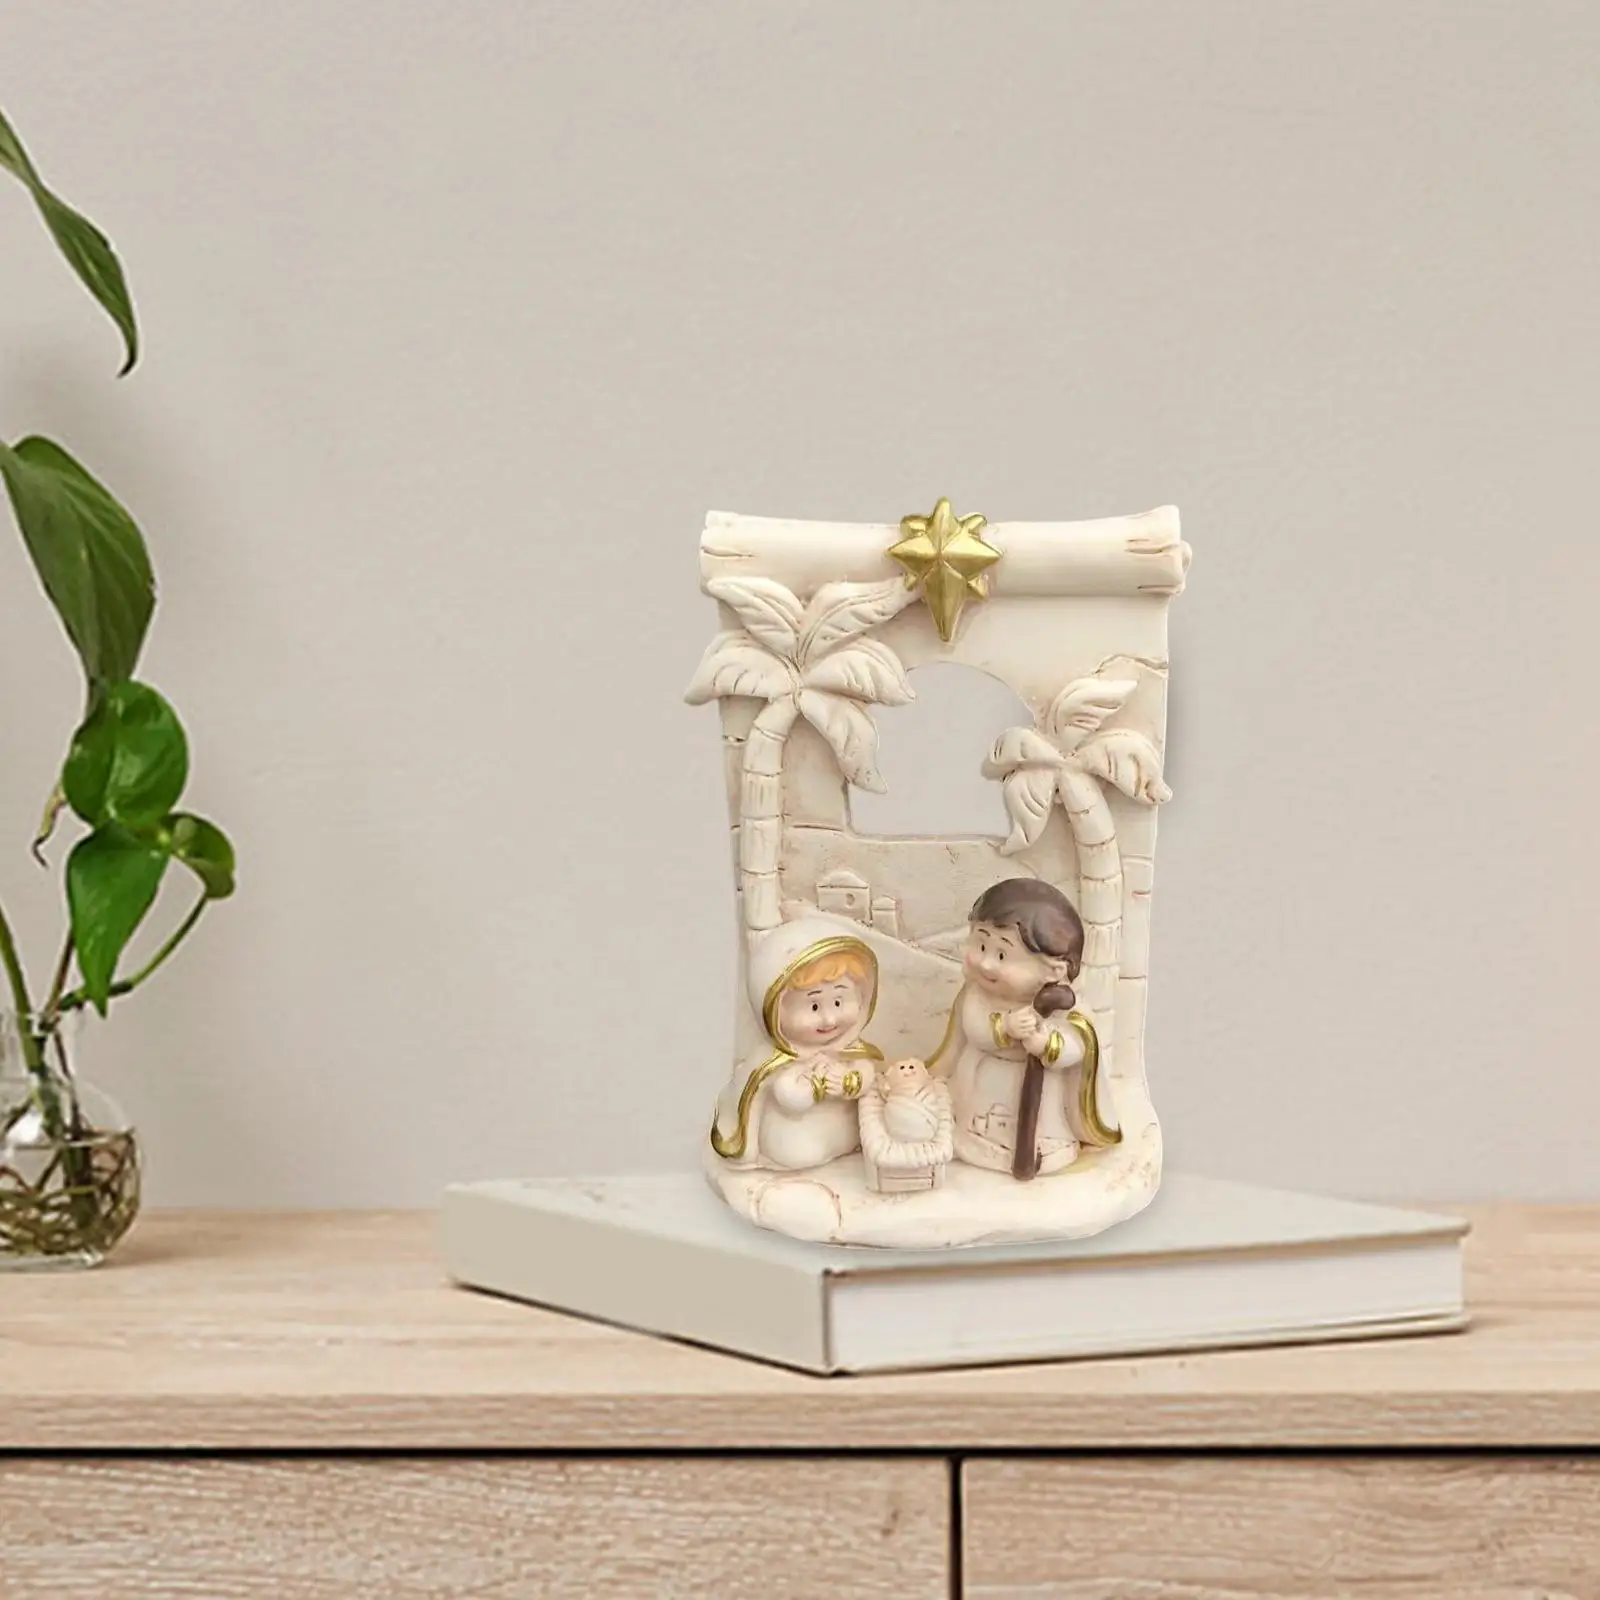 Resin Holy Family Figure Birth of Jesus Scene Collection for Christmas Gifts